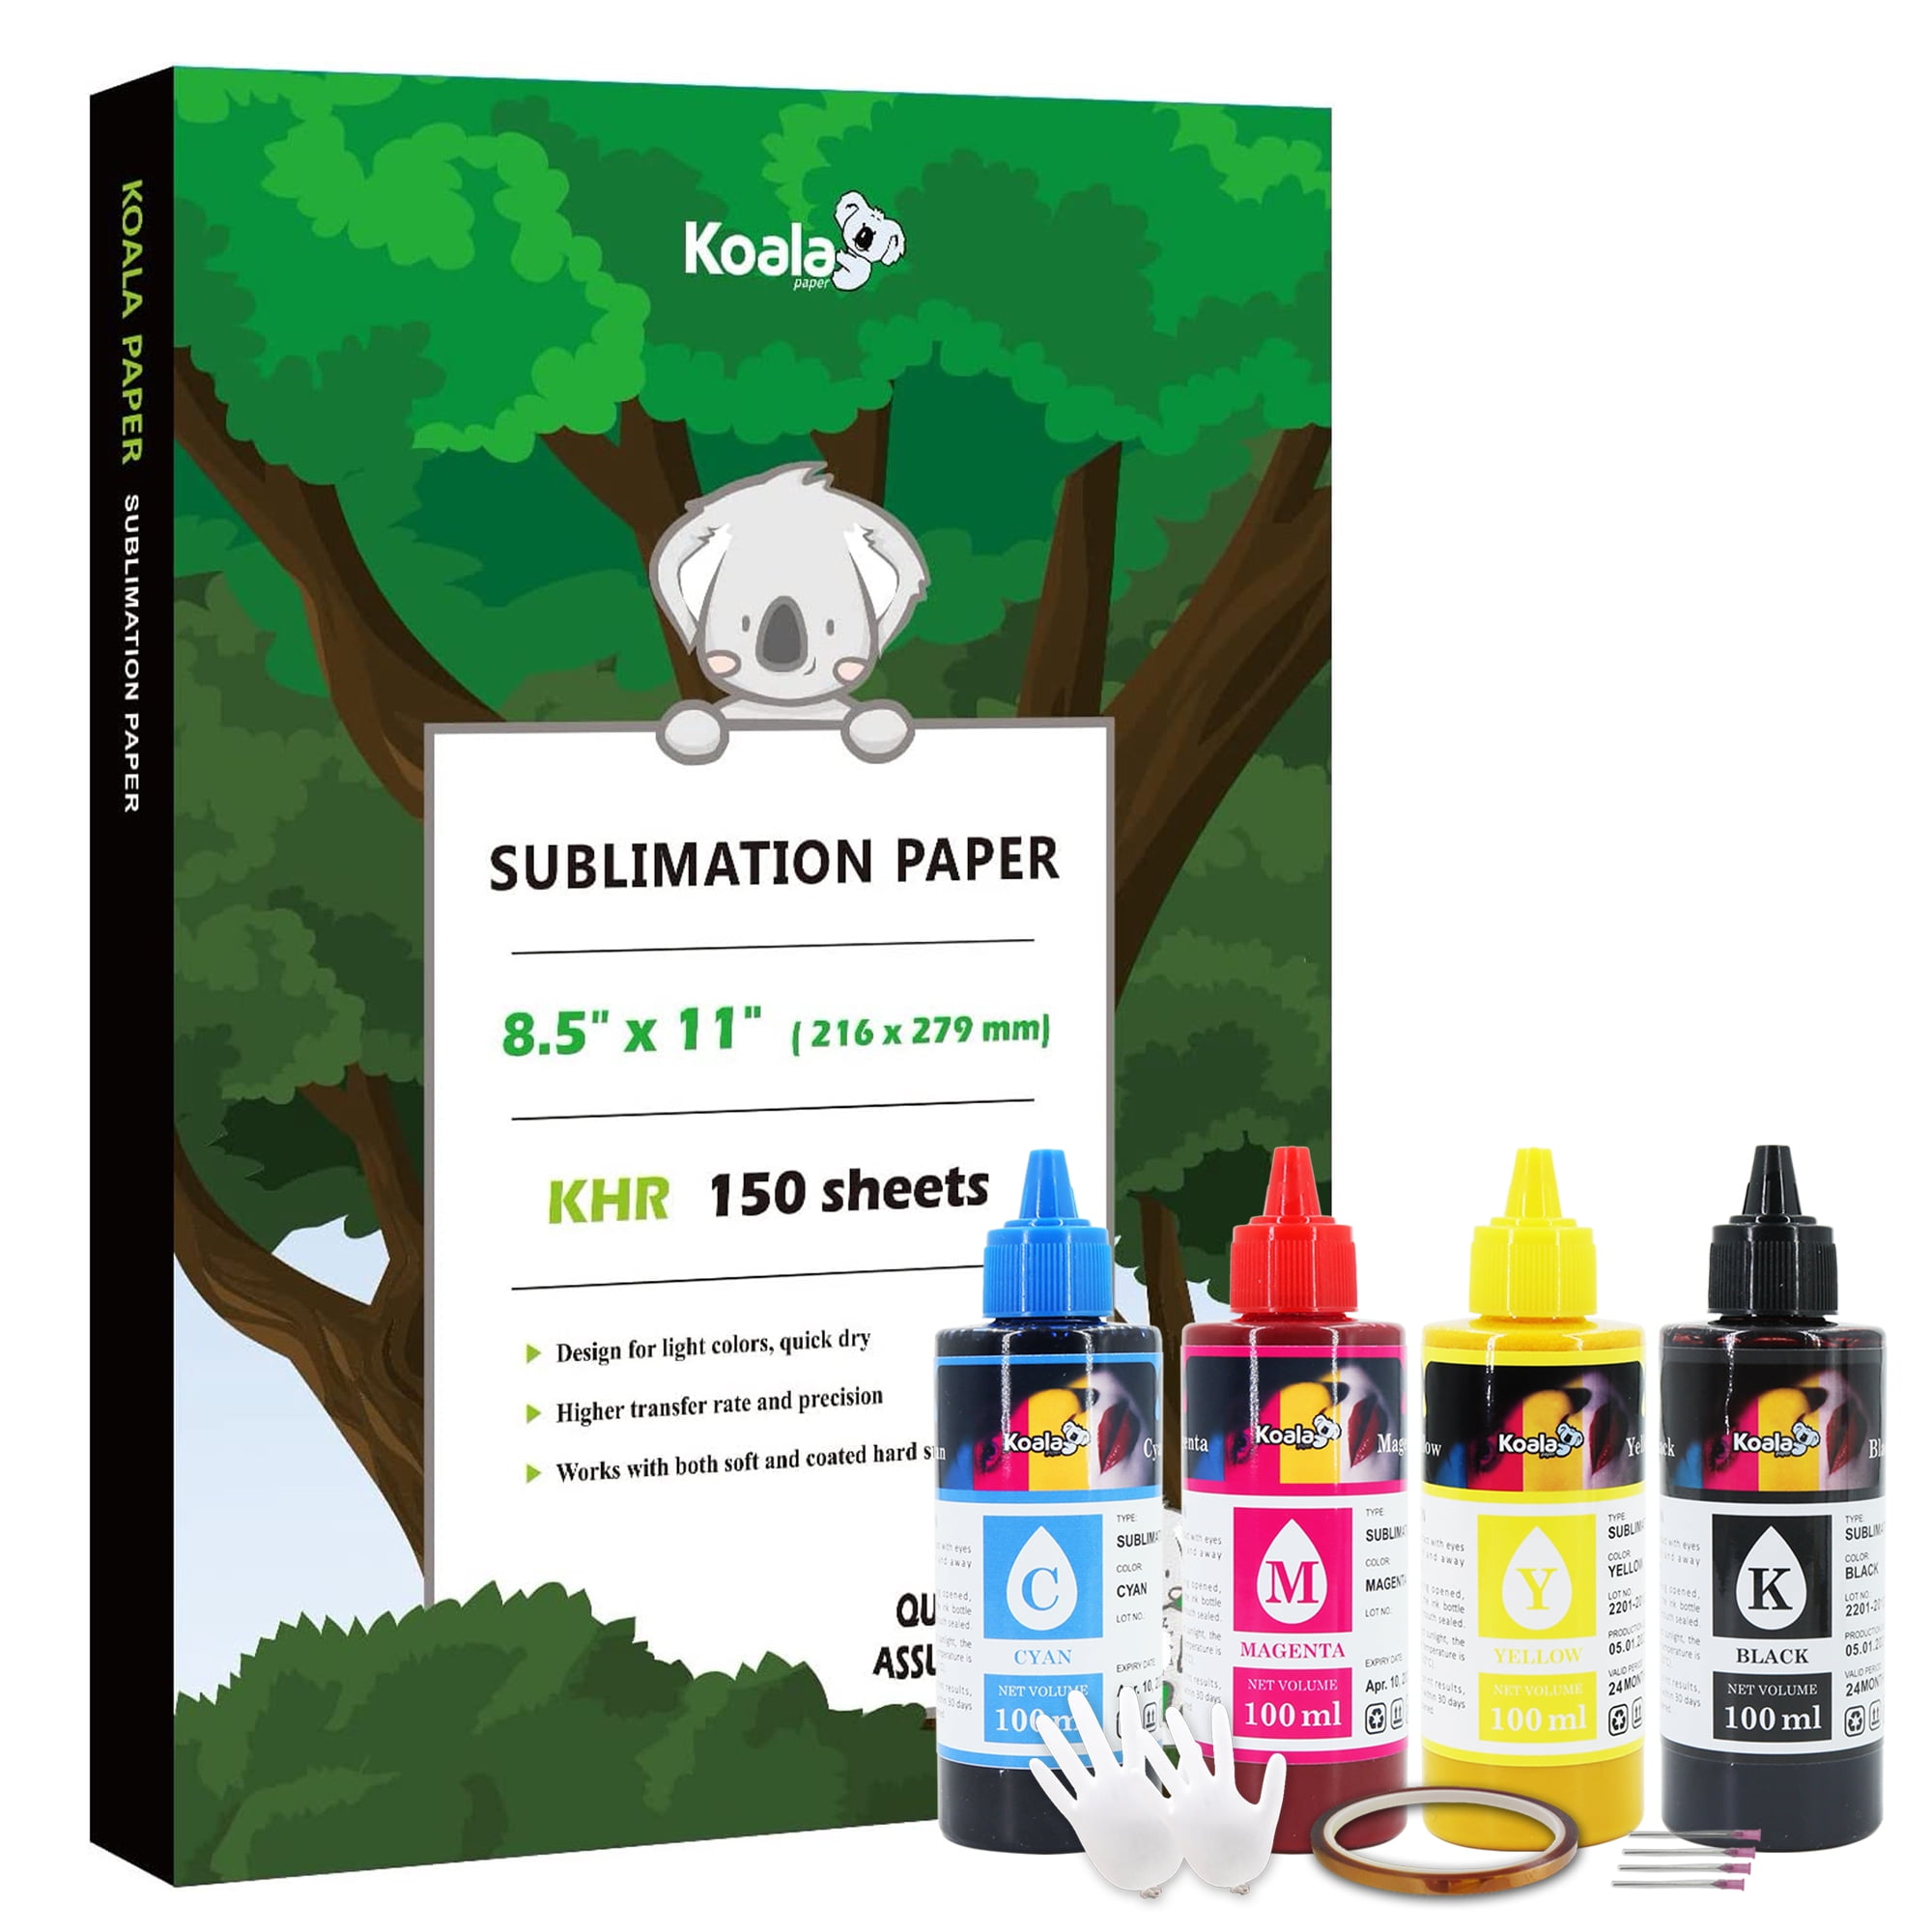 Koala 120 Sheets Sublimation Paper 11x17 for Heat Transfer DIY Gift Compatible with Inkjet Printer with Sublimation Ink, Size: 11 x 17, White